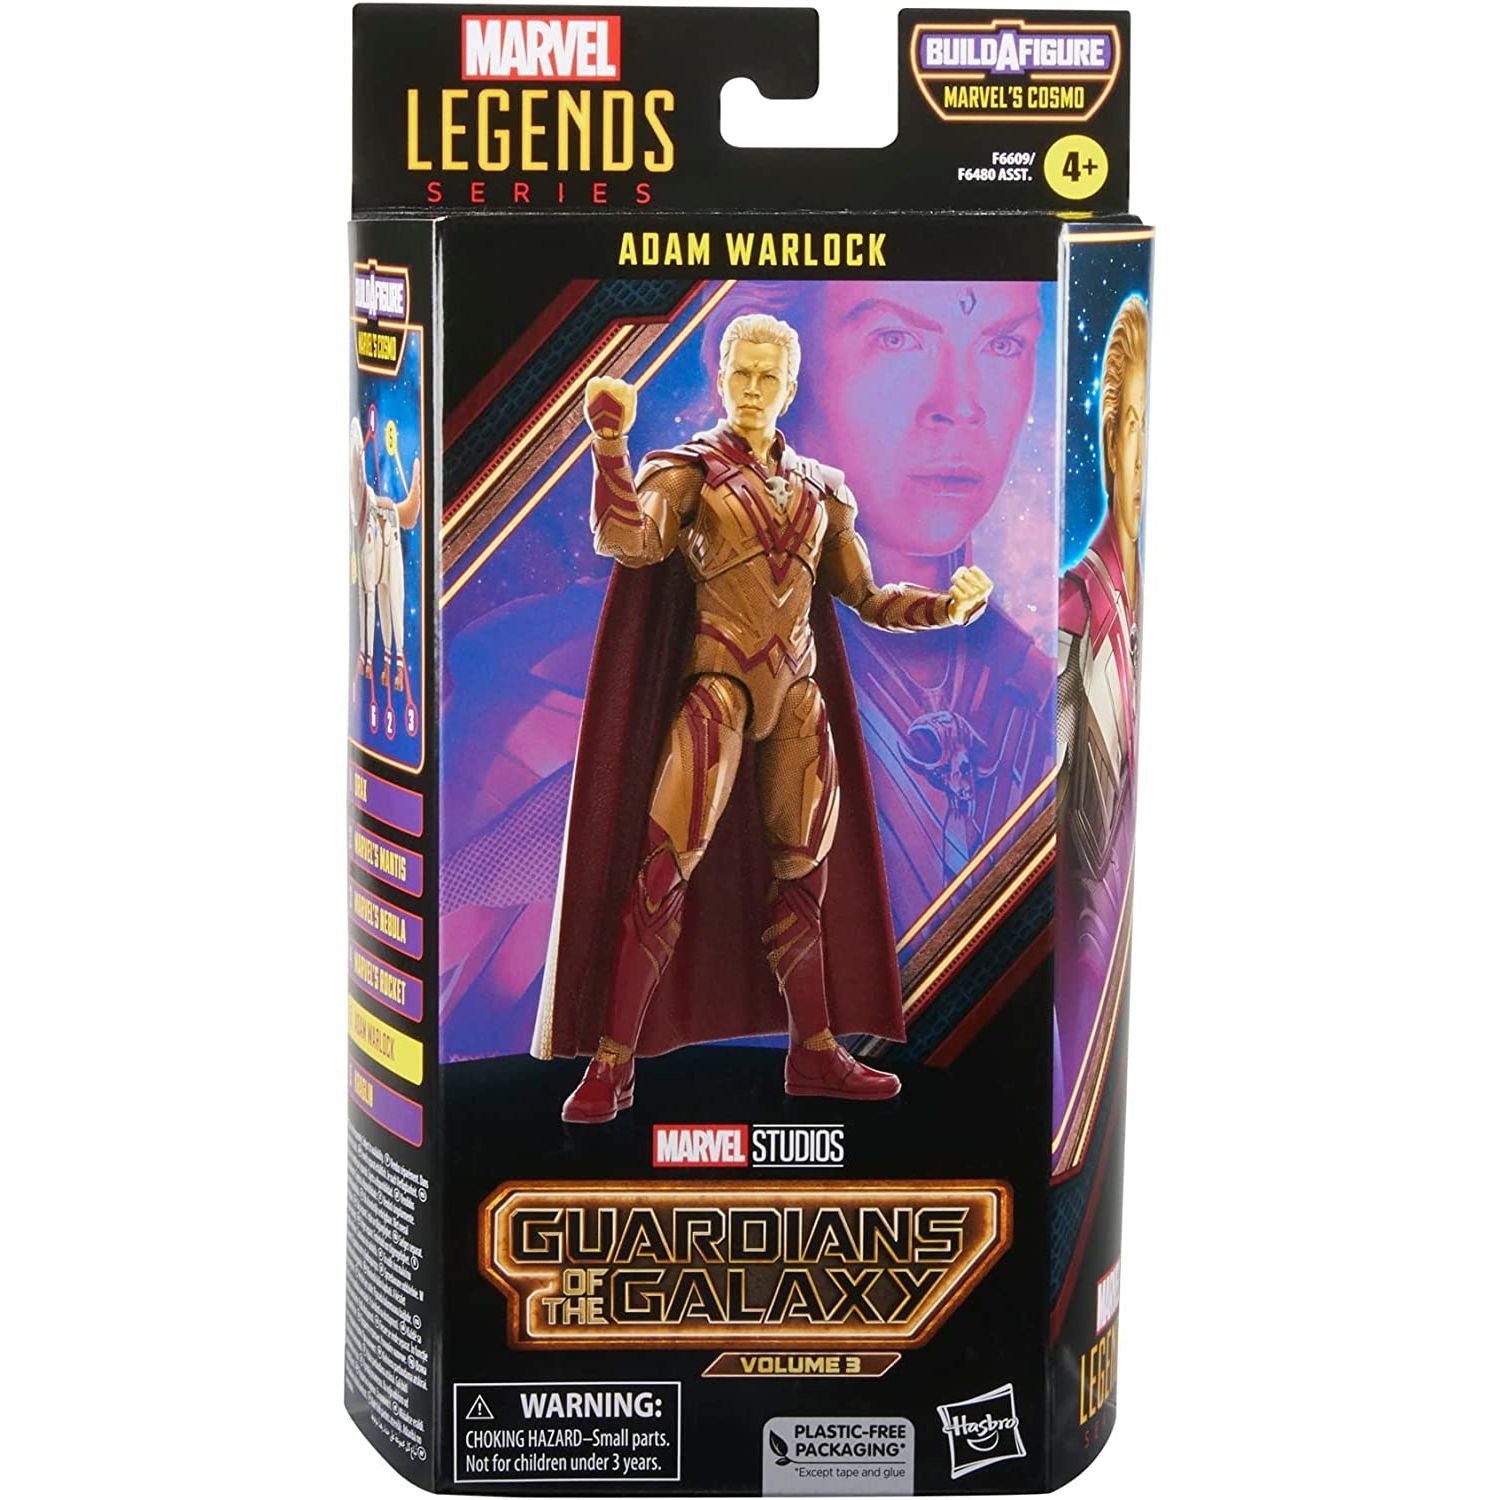  Guardians of the Galaxy Vol. 3 Marvel Legends Adam Warlock 6-Inch Action Figure Toy in a box front view - Heretoserveyou